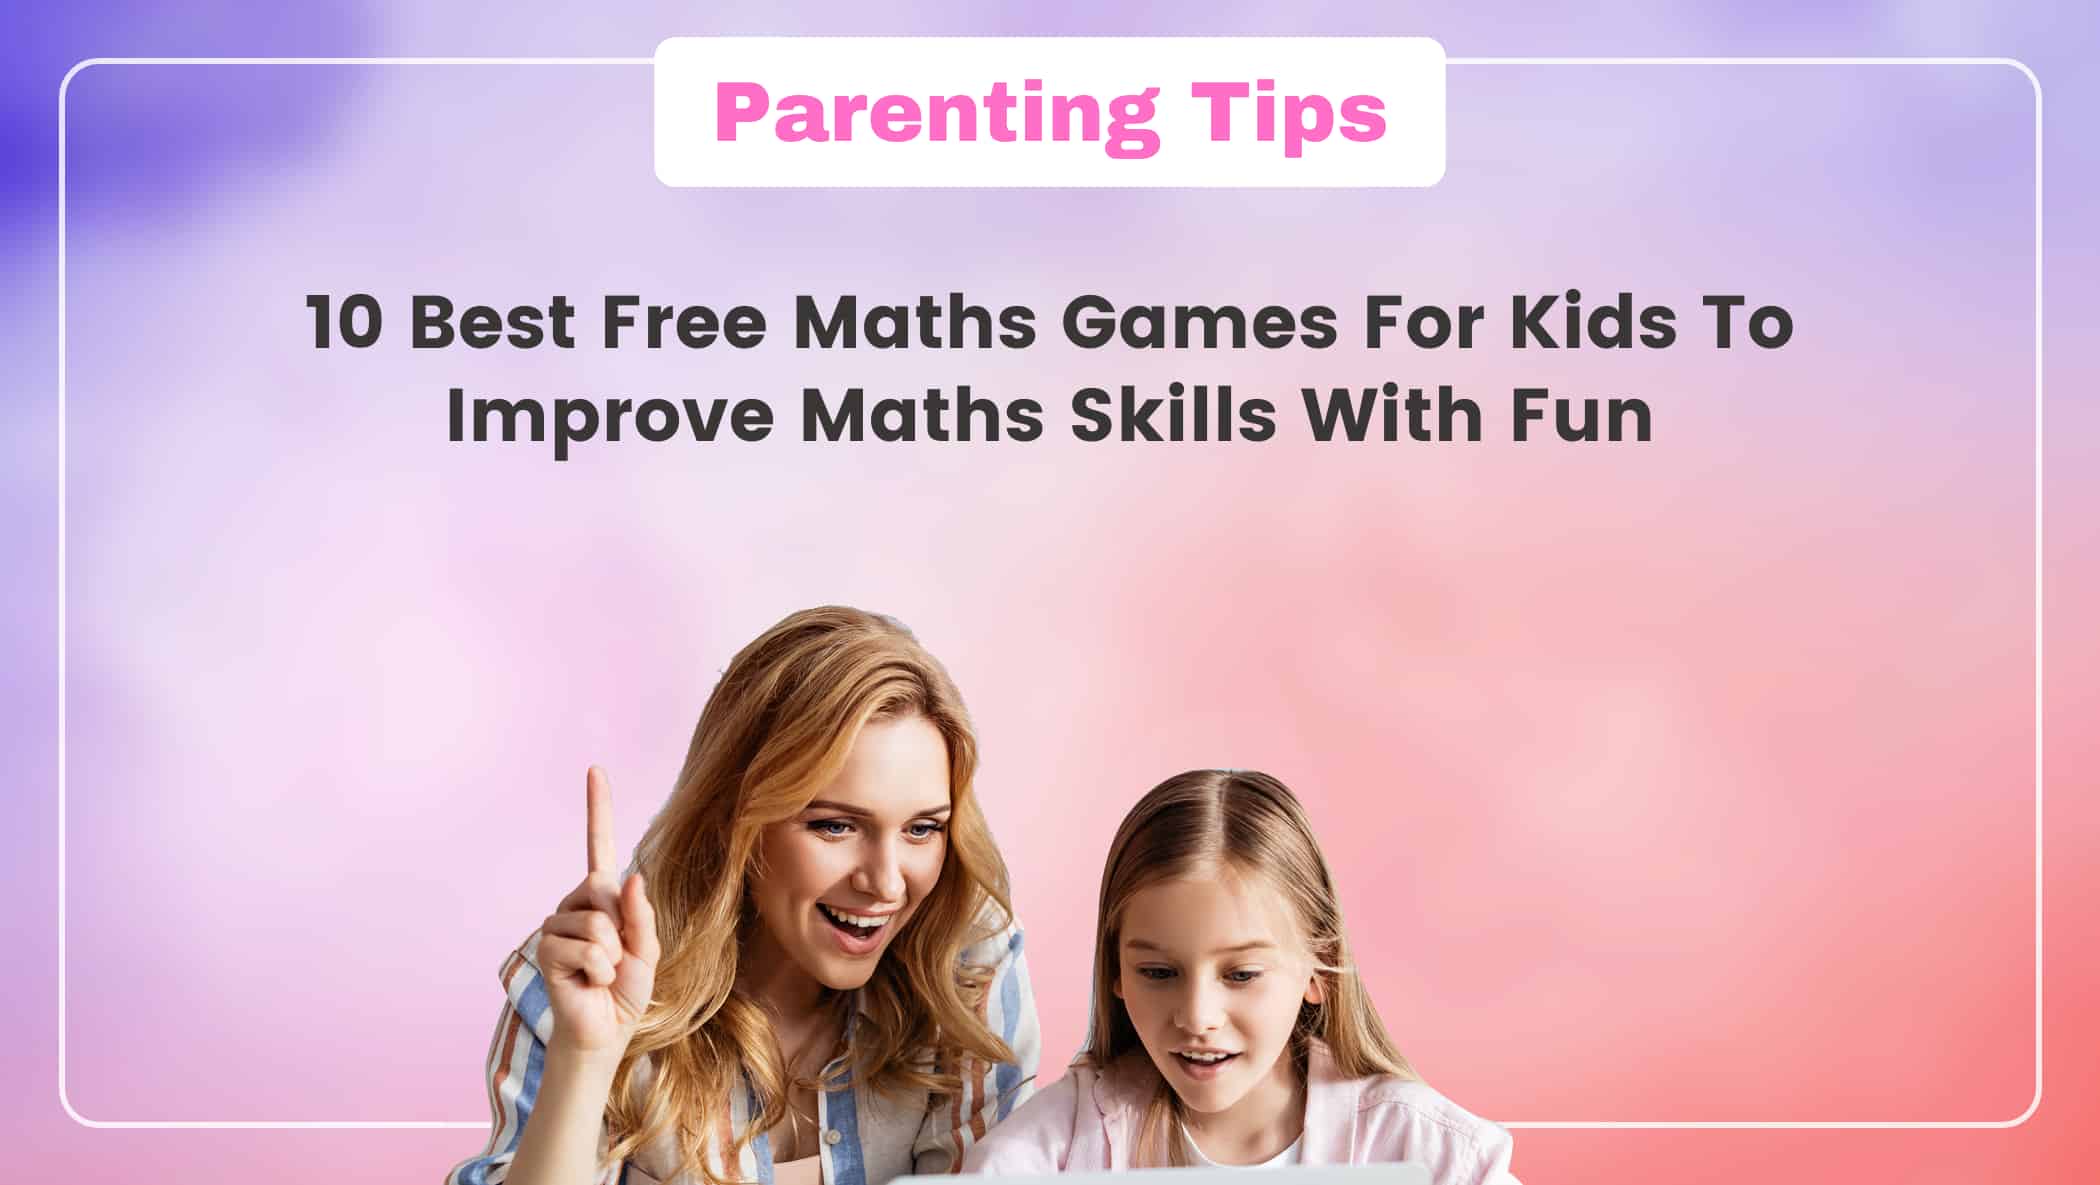 10 Best Free Maths Games For Kids To Improve Maths Skills With Fun Image